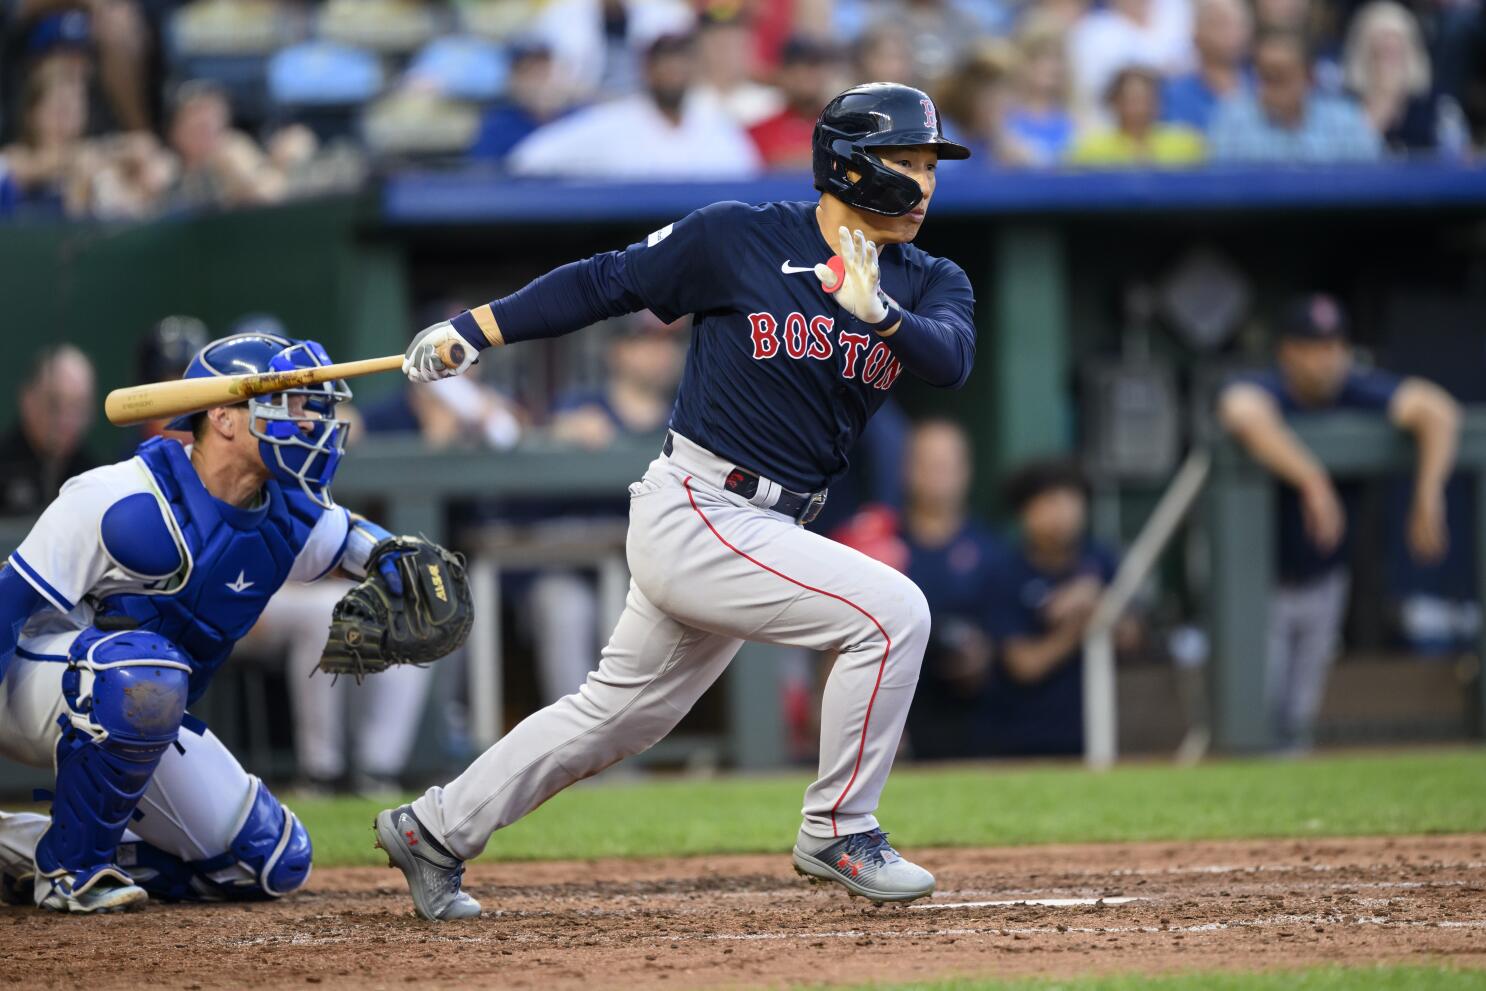 Triston Casas' homer, Alex Verdugo's 3 hits lead the Red Sox to a 9-5 win  over the Royals - The San Diego Union-Tribune